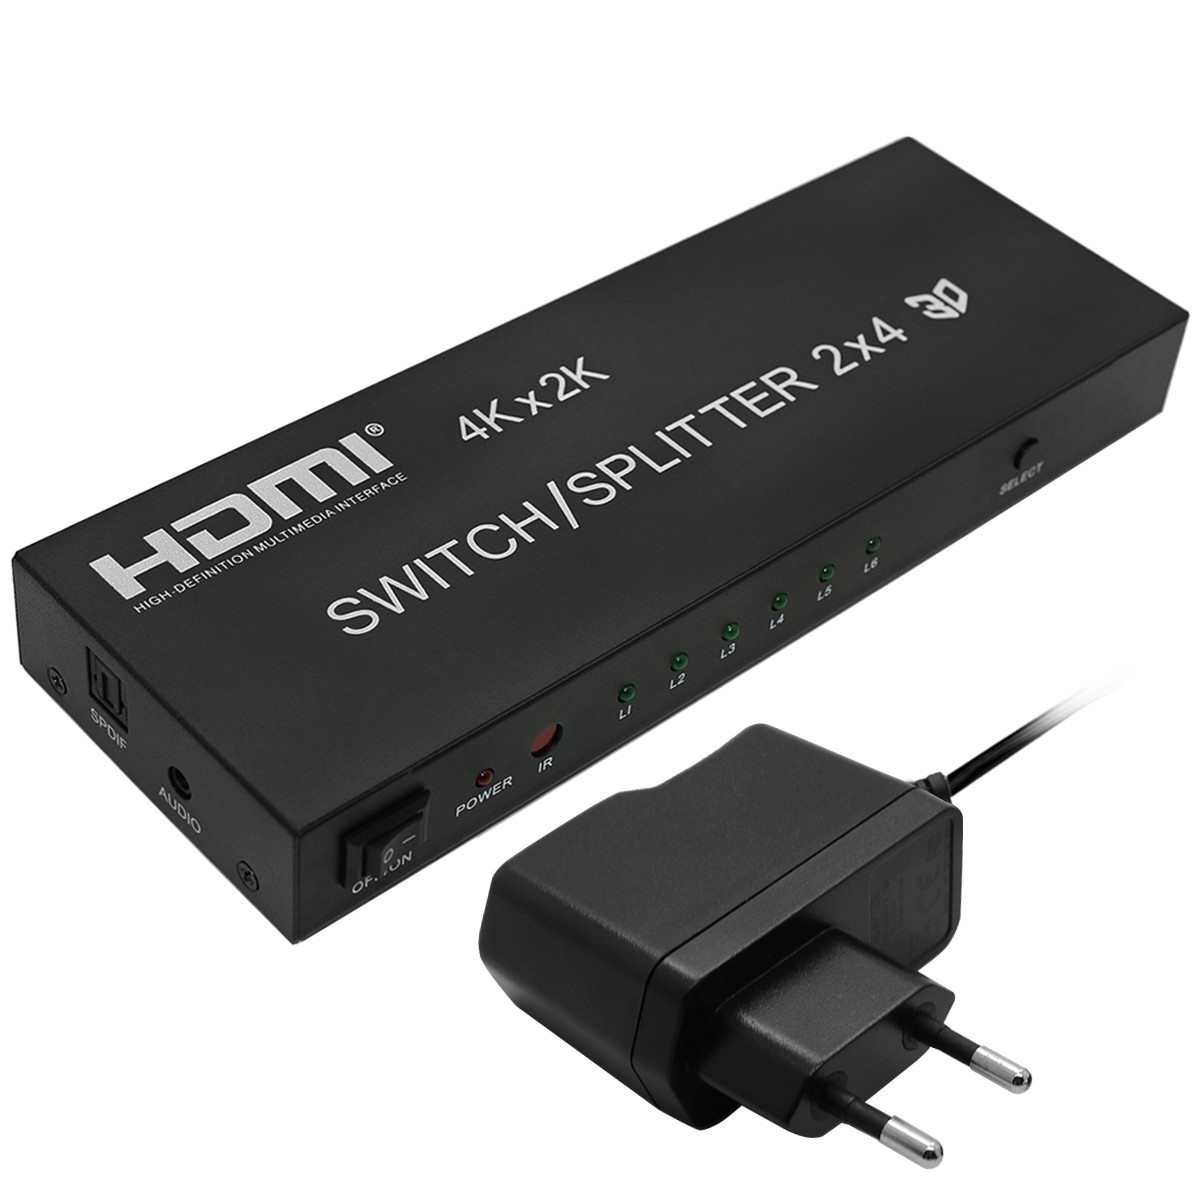 Full HD 1080P 3D 2x4 Matrix HDMI Video Switch Splitter Amplifier 1.4a 4K With Remote For DVD PS3 TV Box HDTV